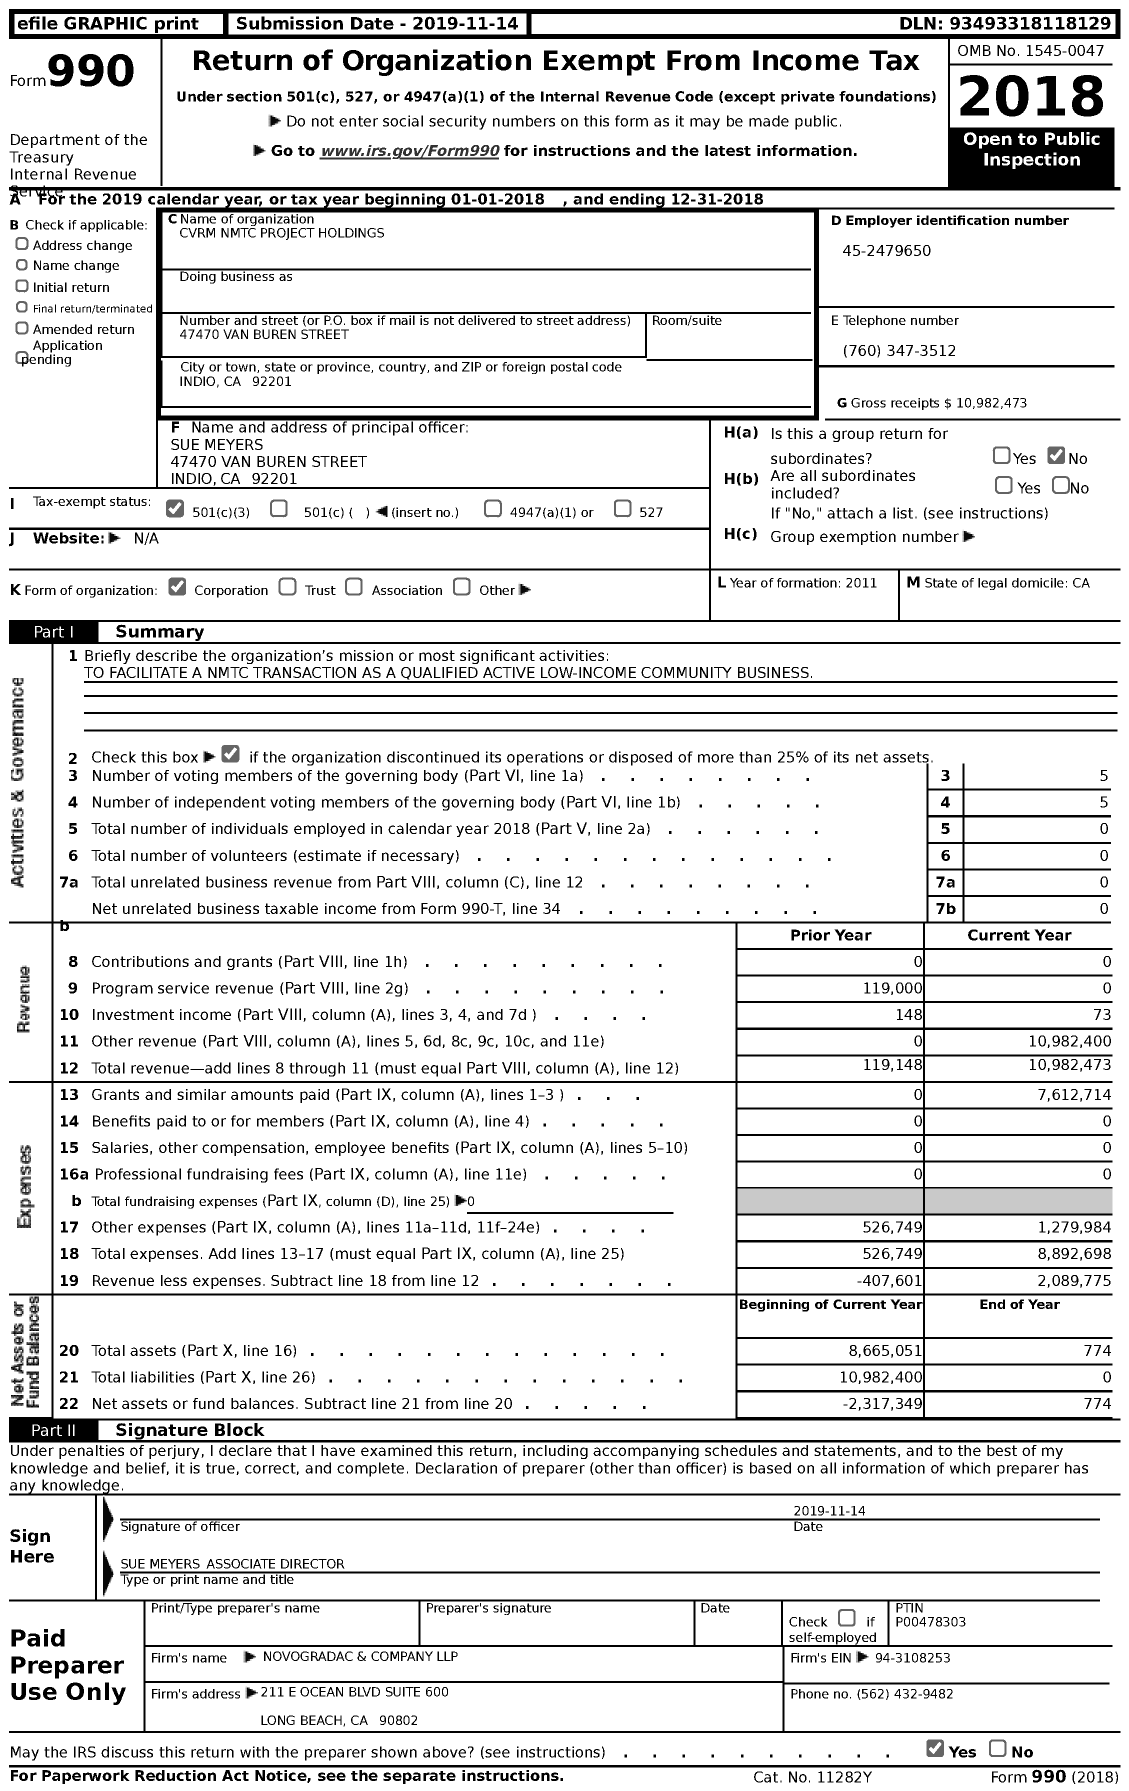 Image of first page of 2018 Form 990 for CVRM NMTC Project Holdings